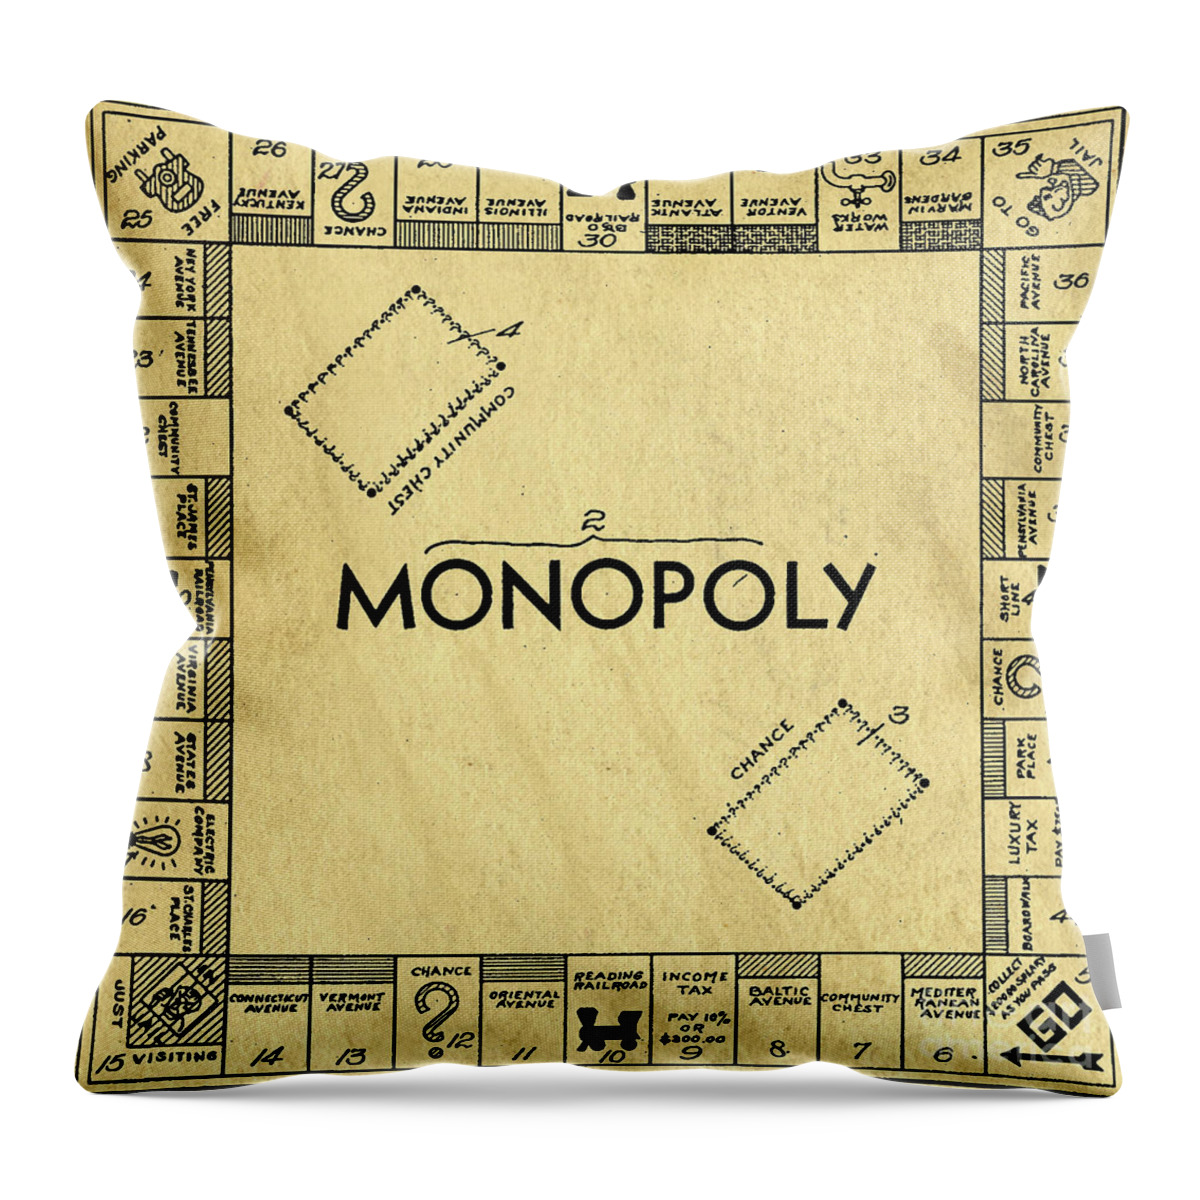 Monopoly Throw Pillow featuring the drawing Original Patent For Monopoly Board Game Square by Edward Fielding